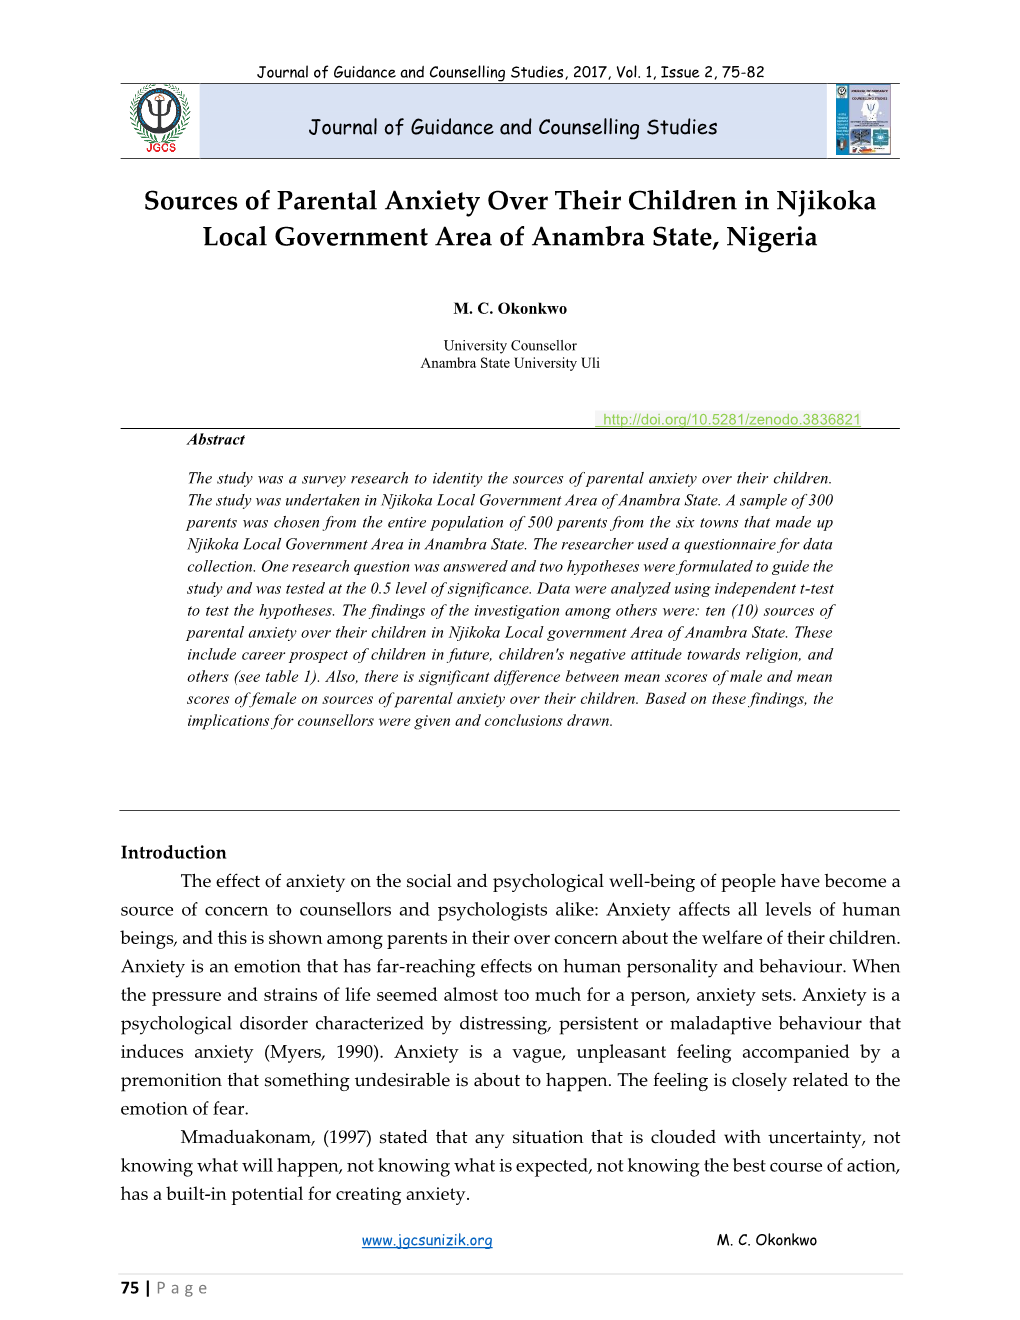 Sources of Parental Anxiety Over Their Children in Njikoka Local Government Area of Anambra State, Nigeria